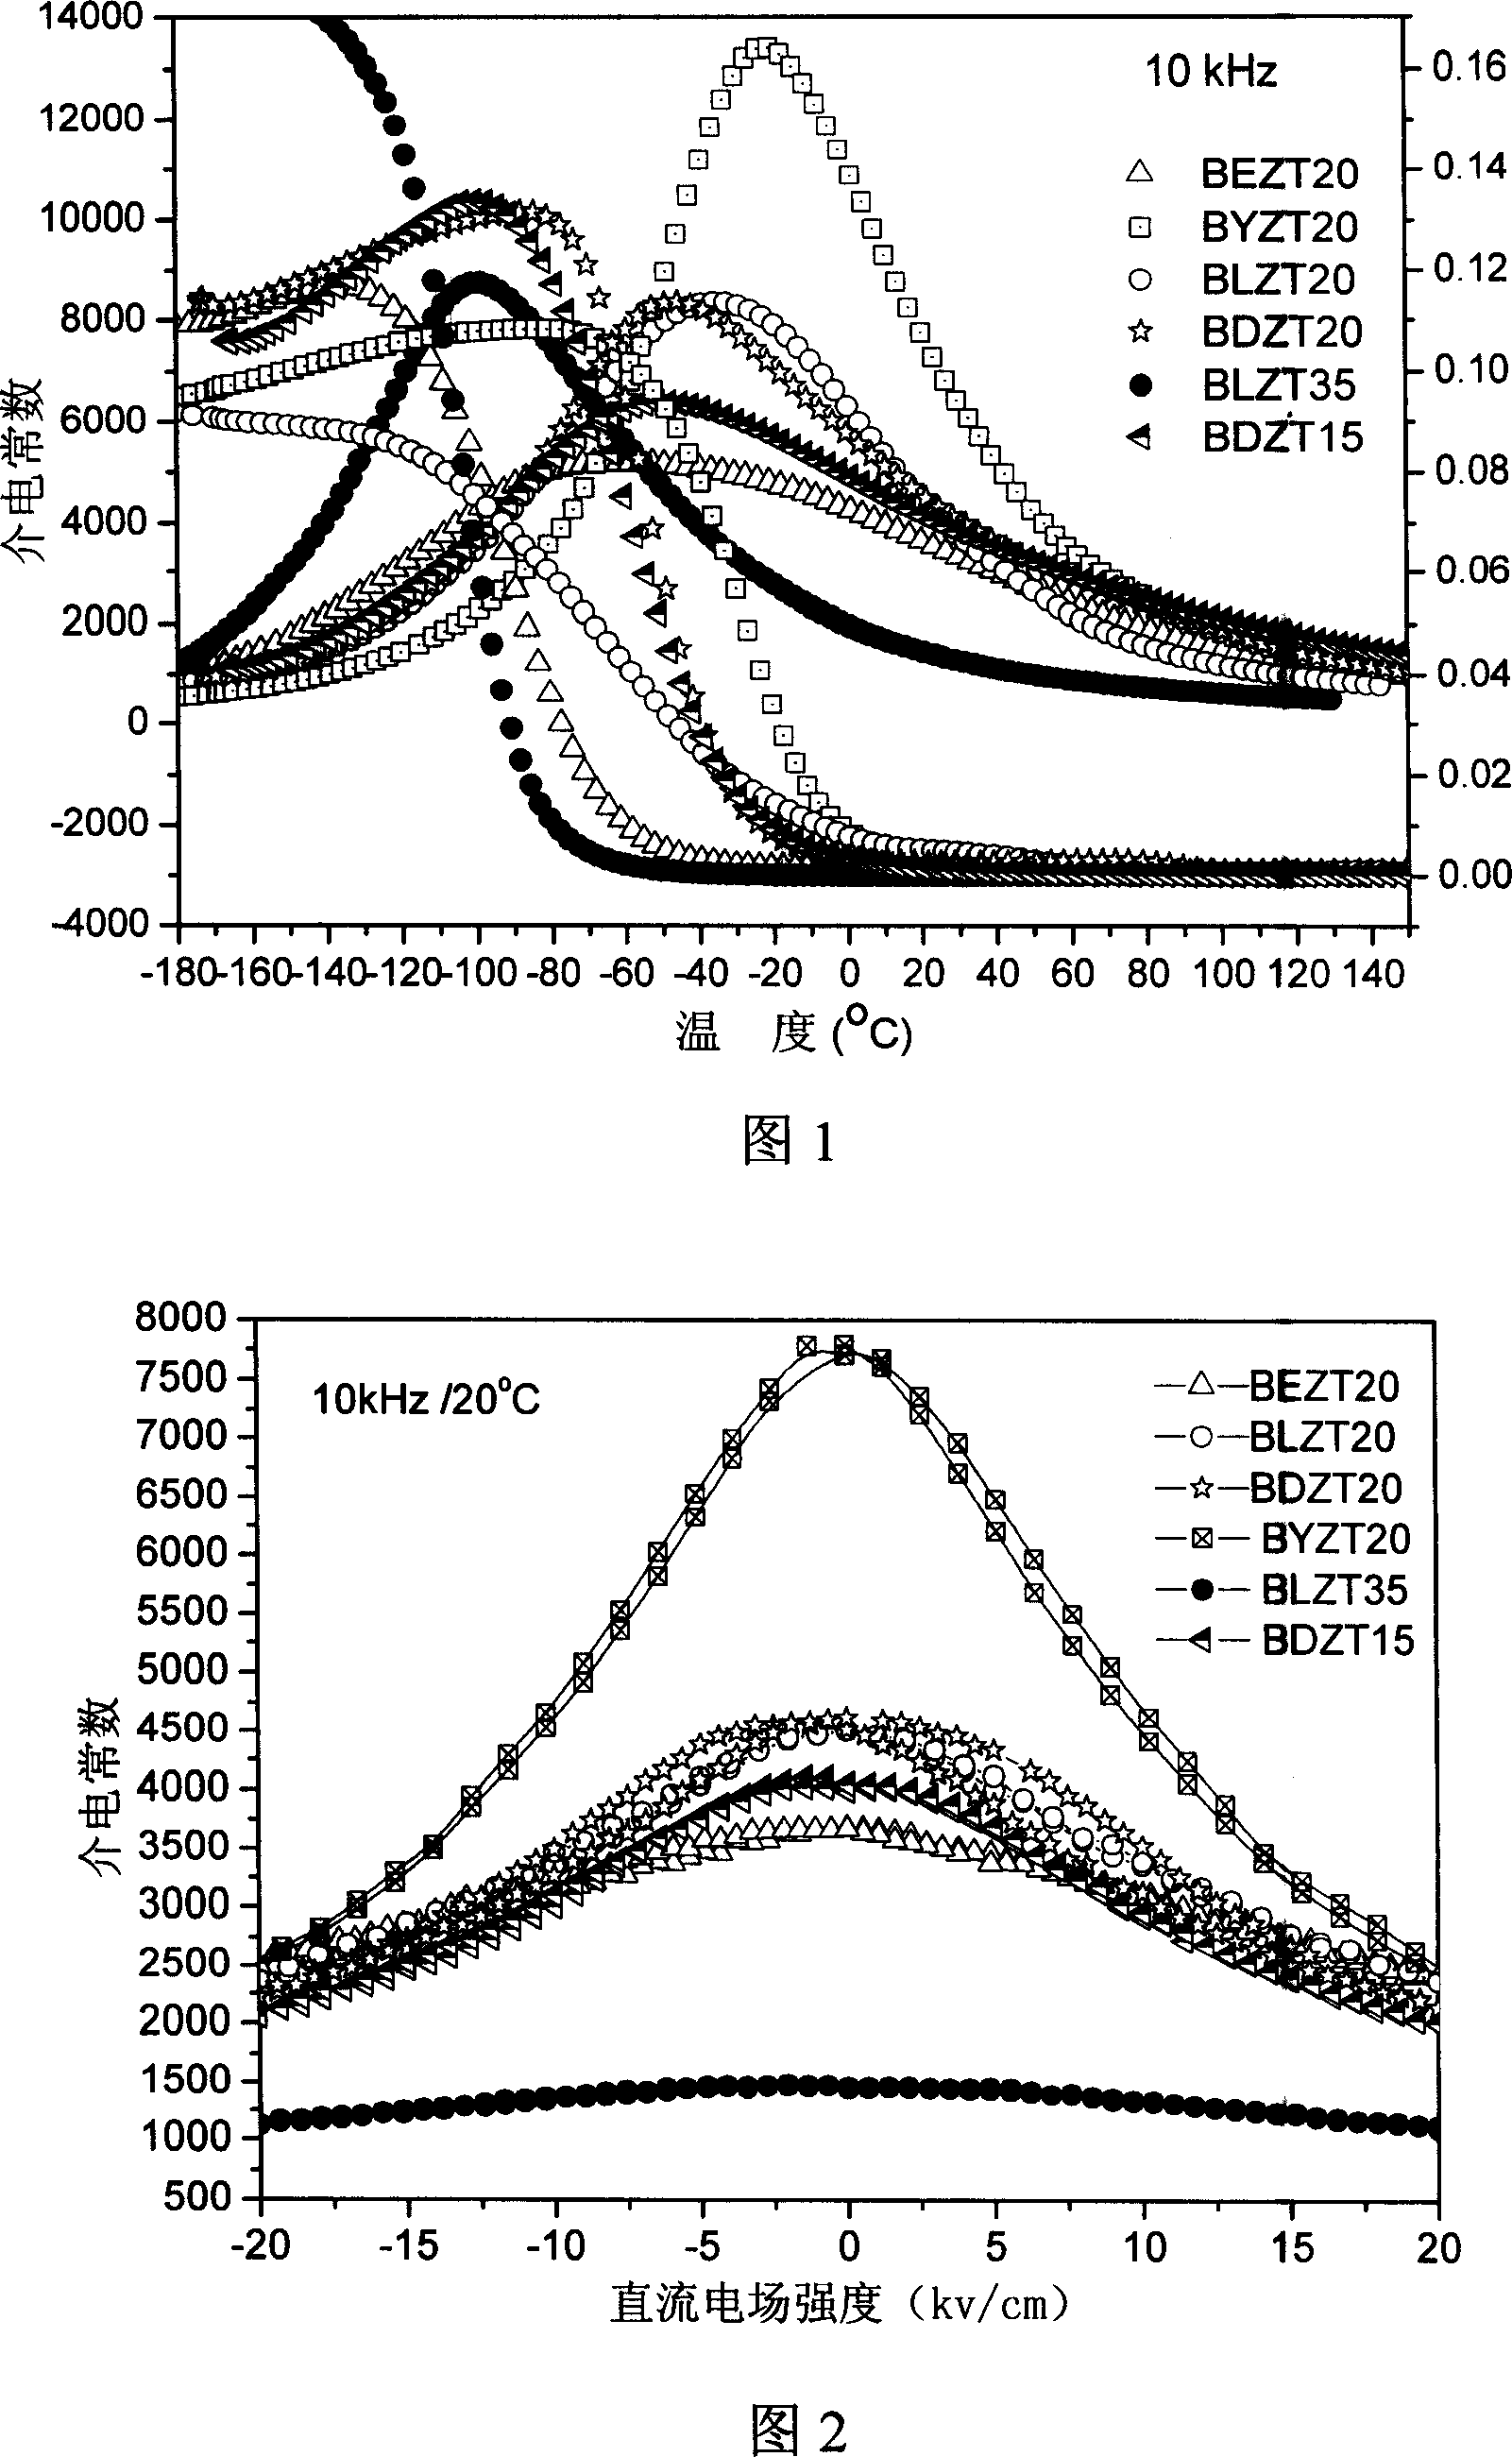 Rare earth oxide doped and modified barium zirconate titanate dielectric adjustable ceramic material and its preparation method